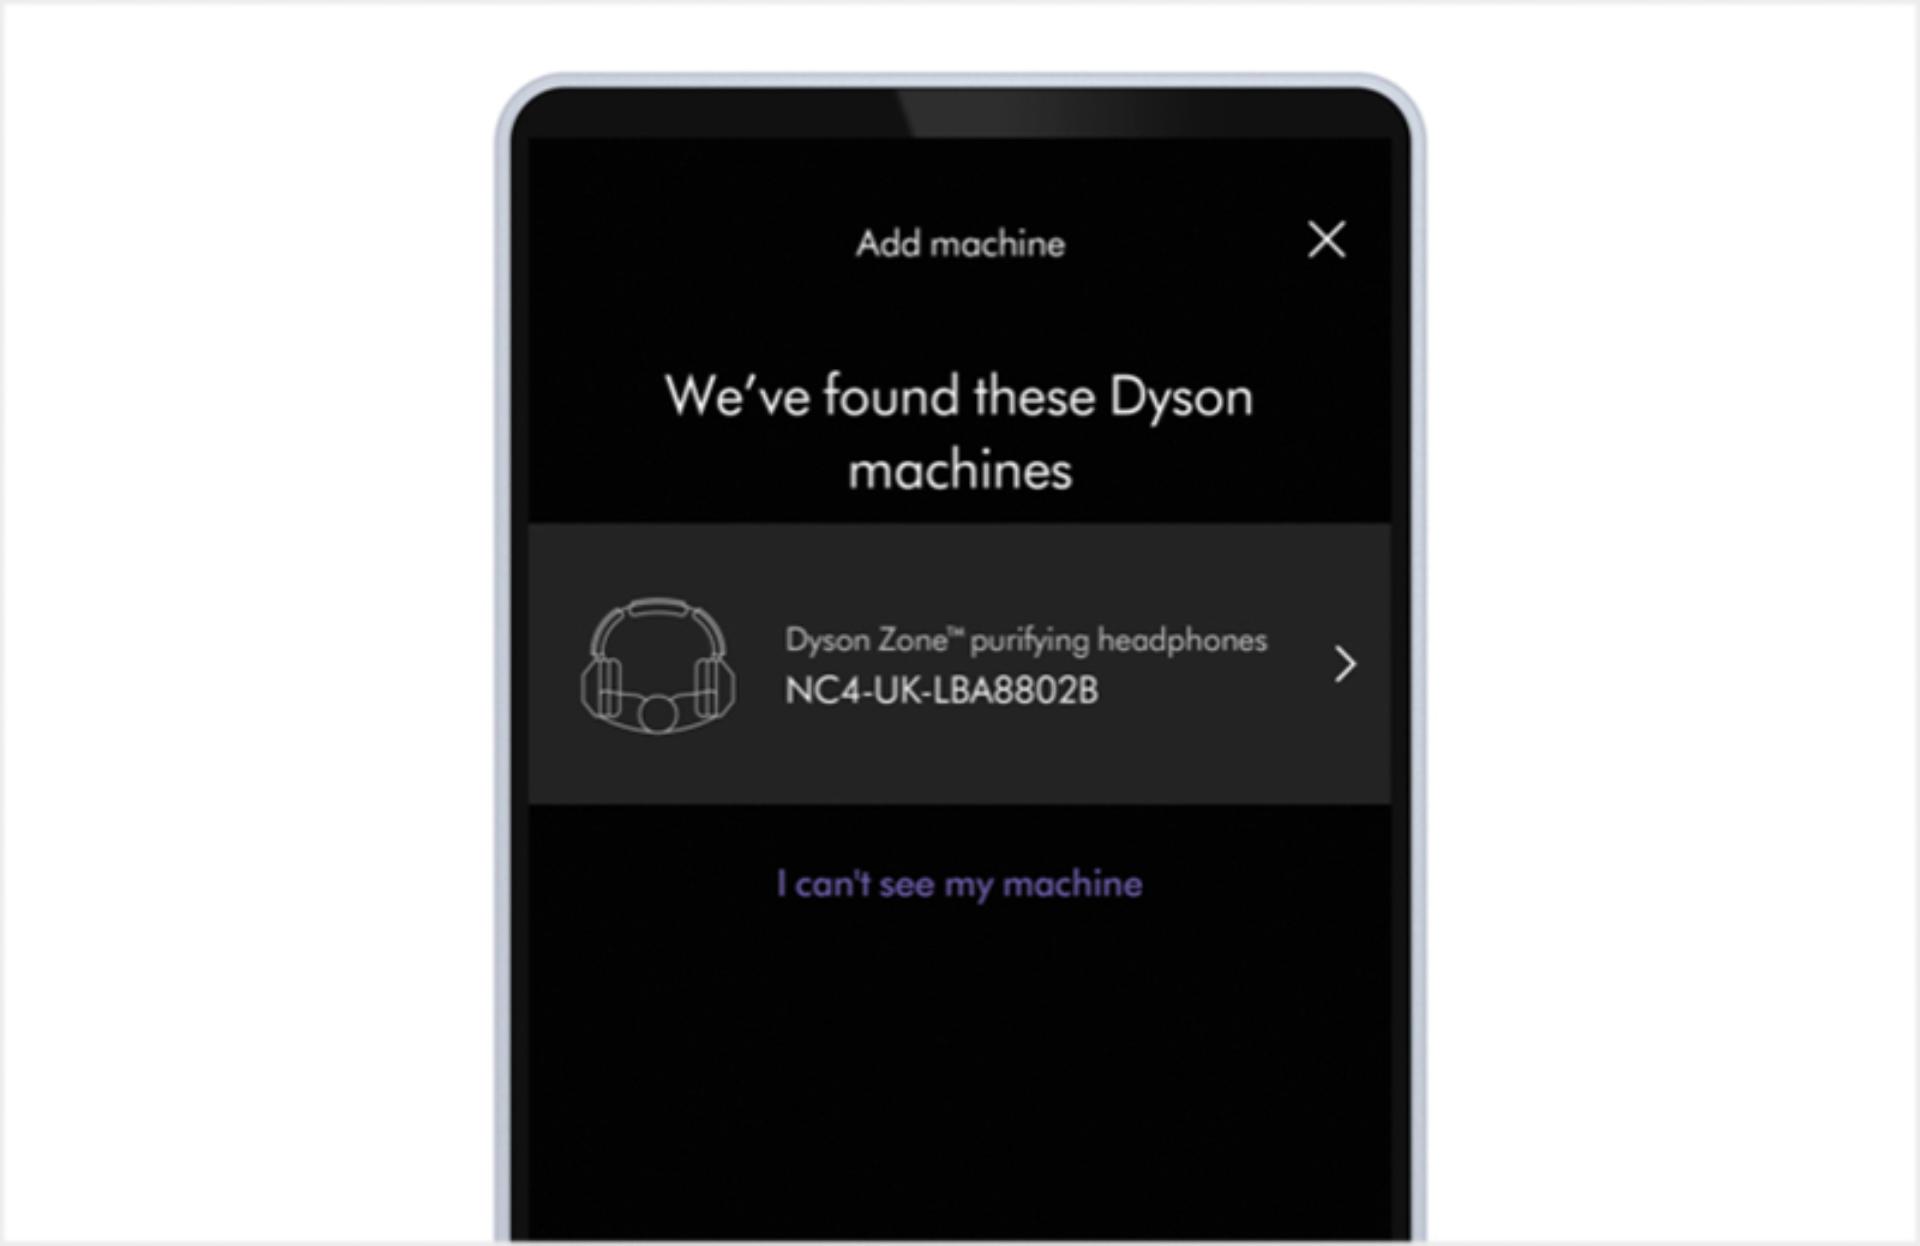 The pair and connect screen in the MyDyson app displayed on a smartphone.